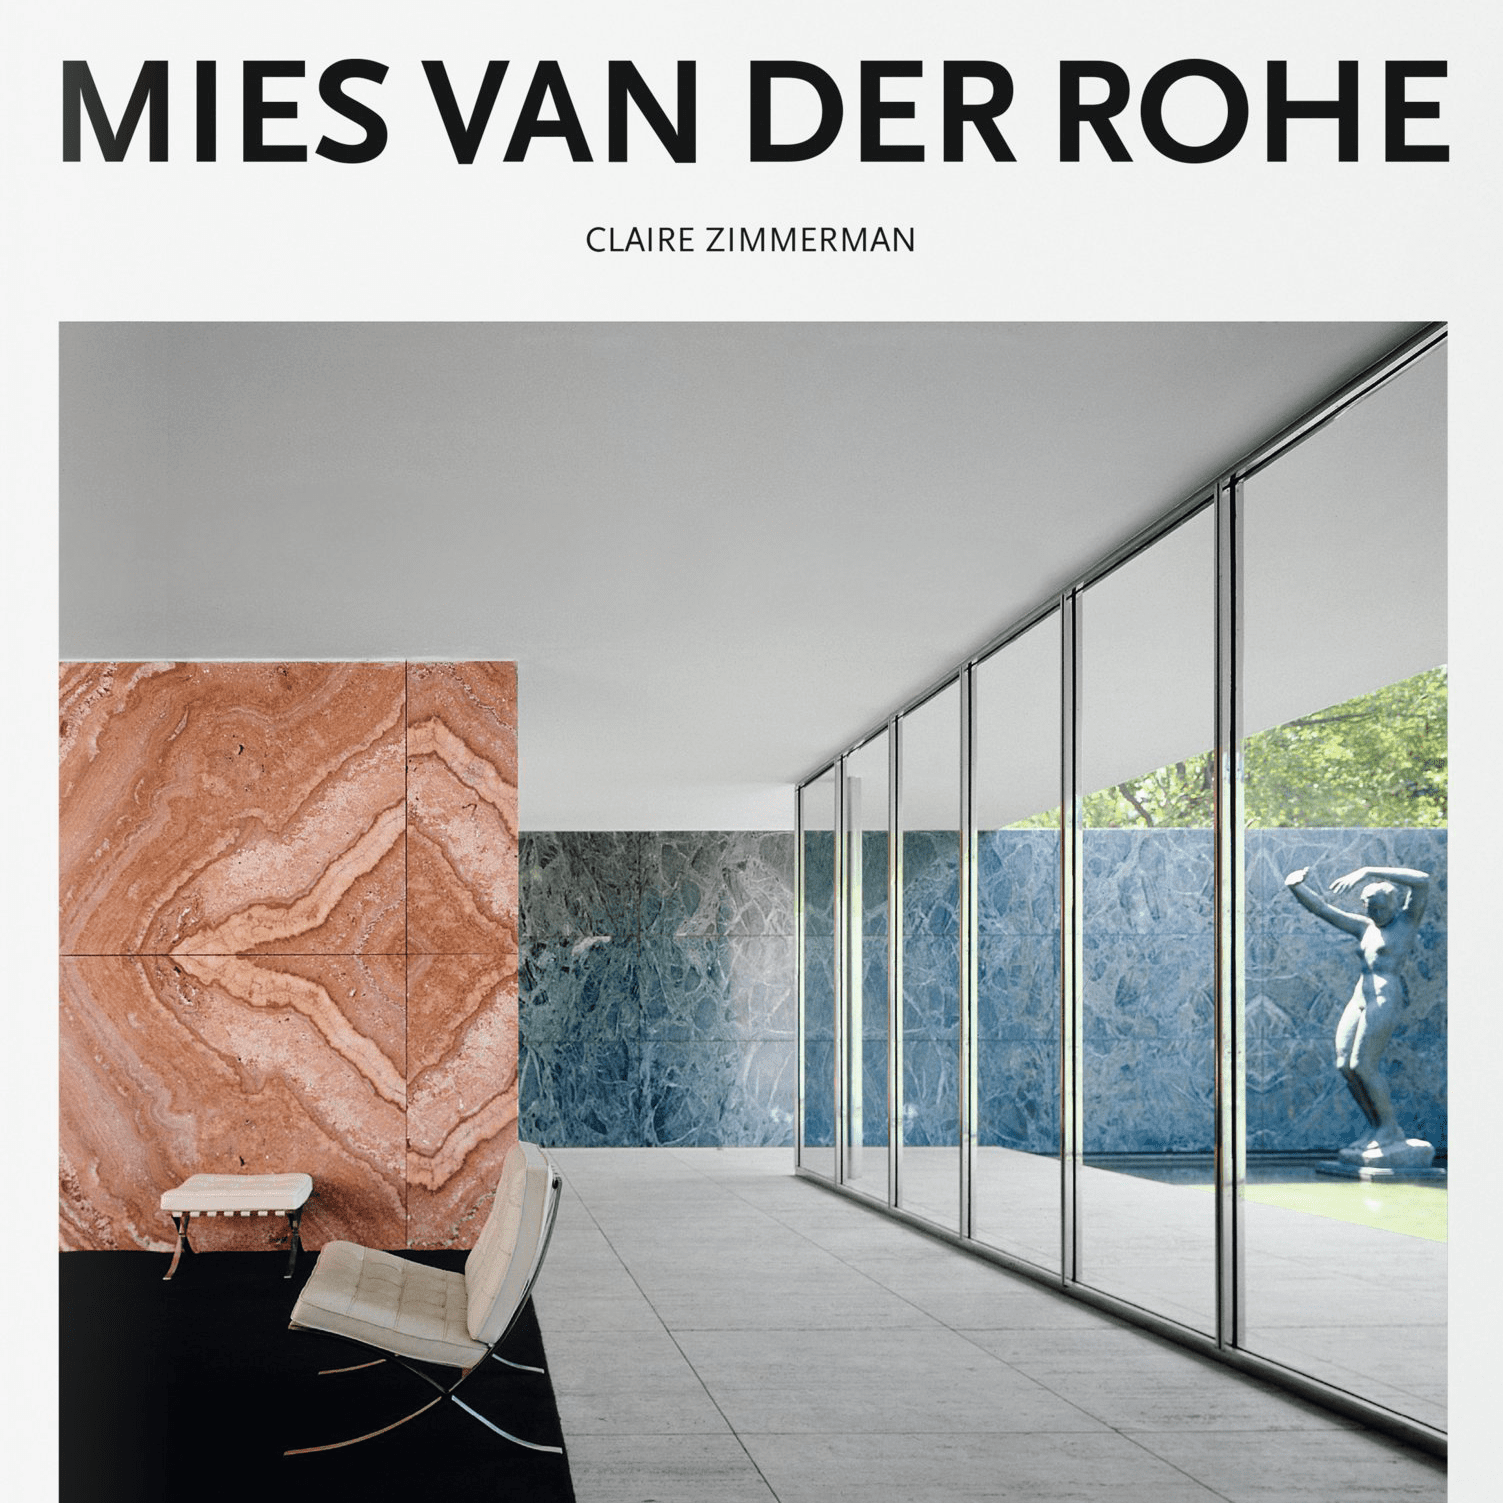 Mies van der Rohe's projects from 1906 to 1967の画像